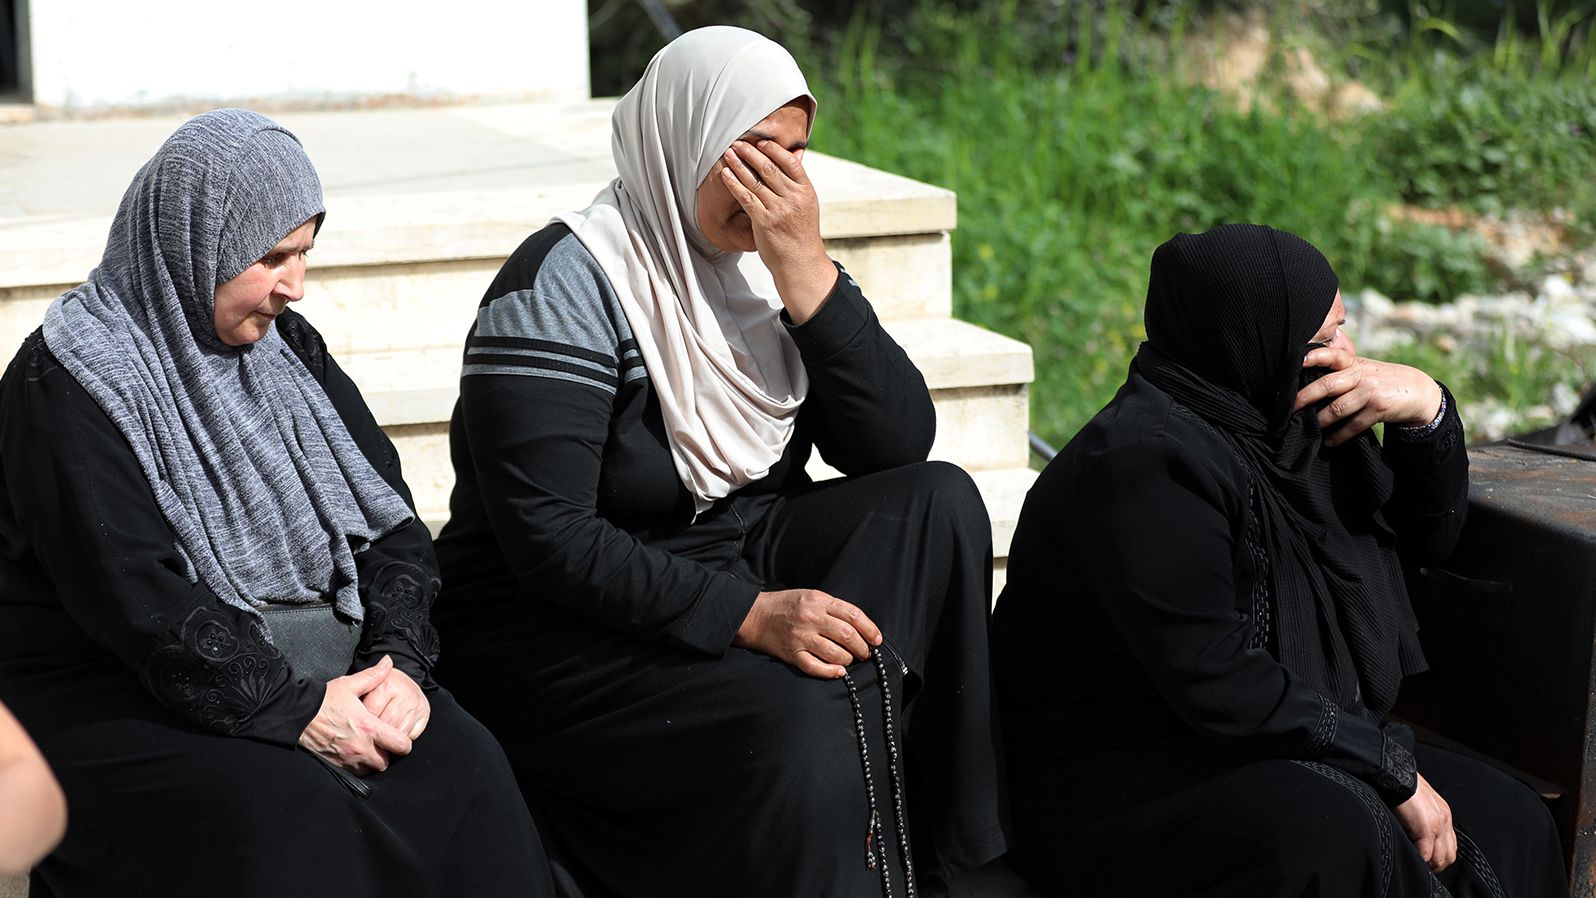 Relatives mourn during the funeral of Ghada Sbatin, who died after being shot by Israeli soldiers, in the West Bank village of Husan, on April 10.